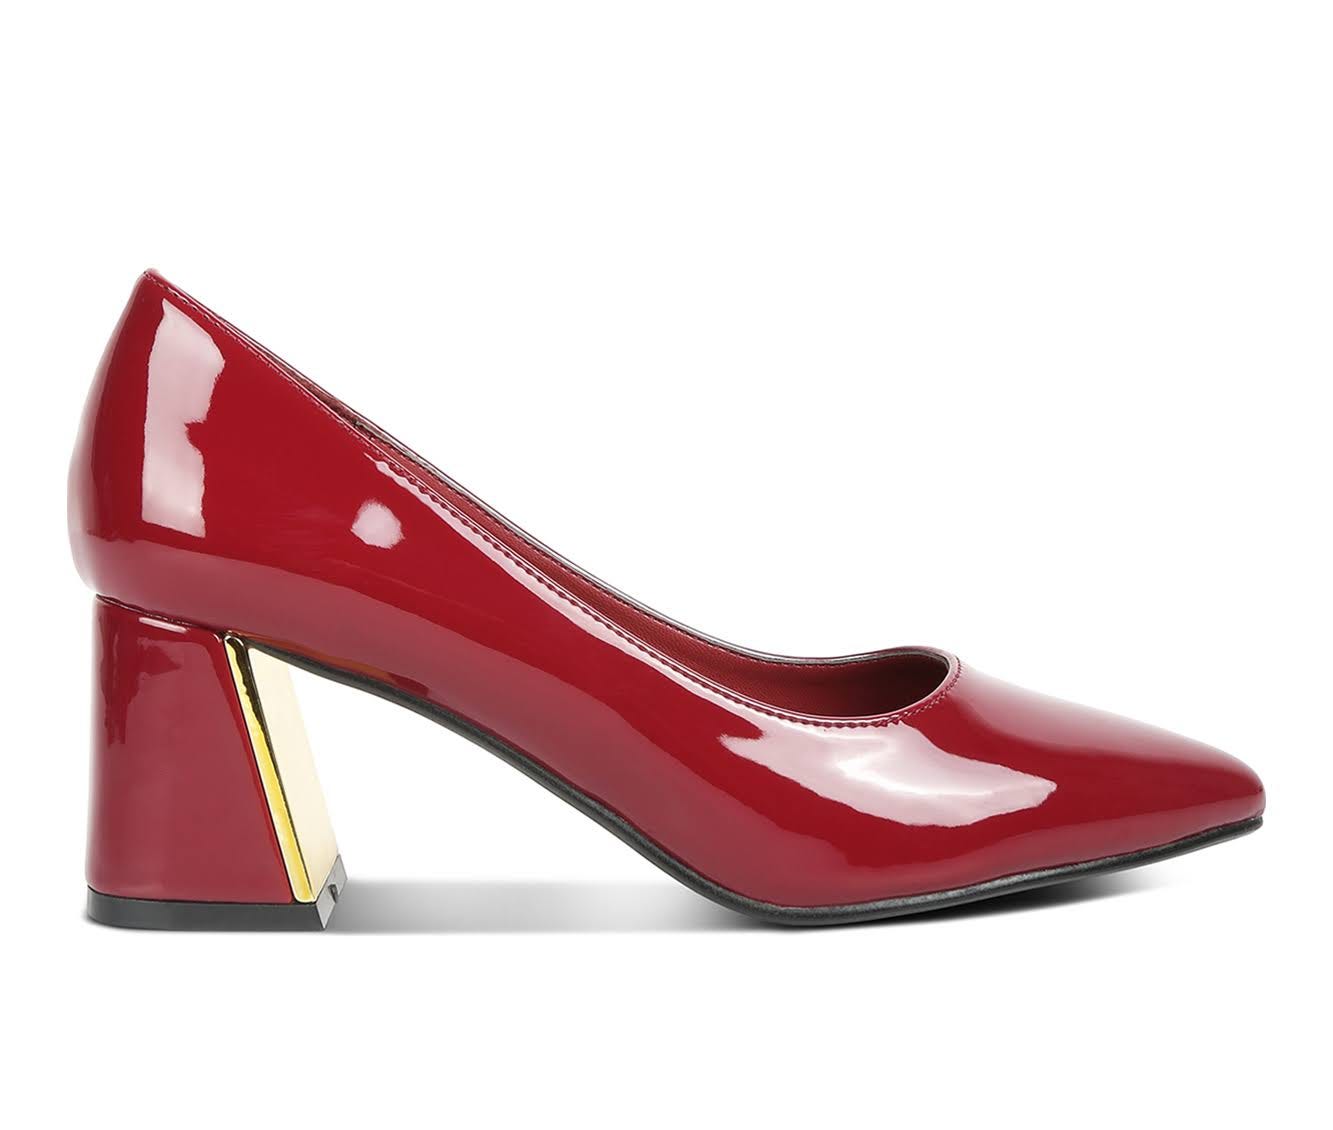 Stylish Burgundy Block Heel Pumps with Patent Faux Leather and TPR Outsole | Image